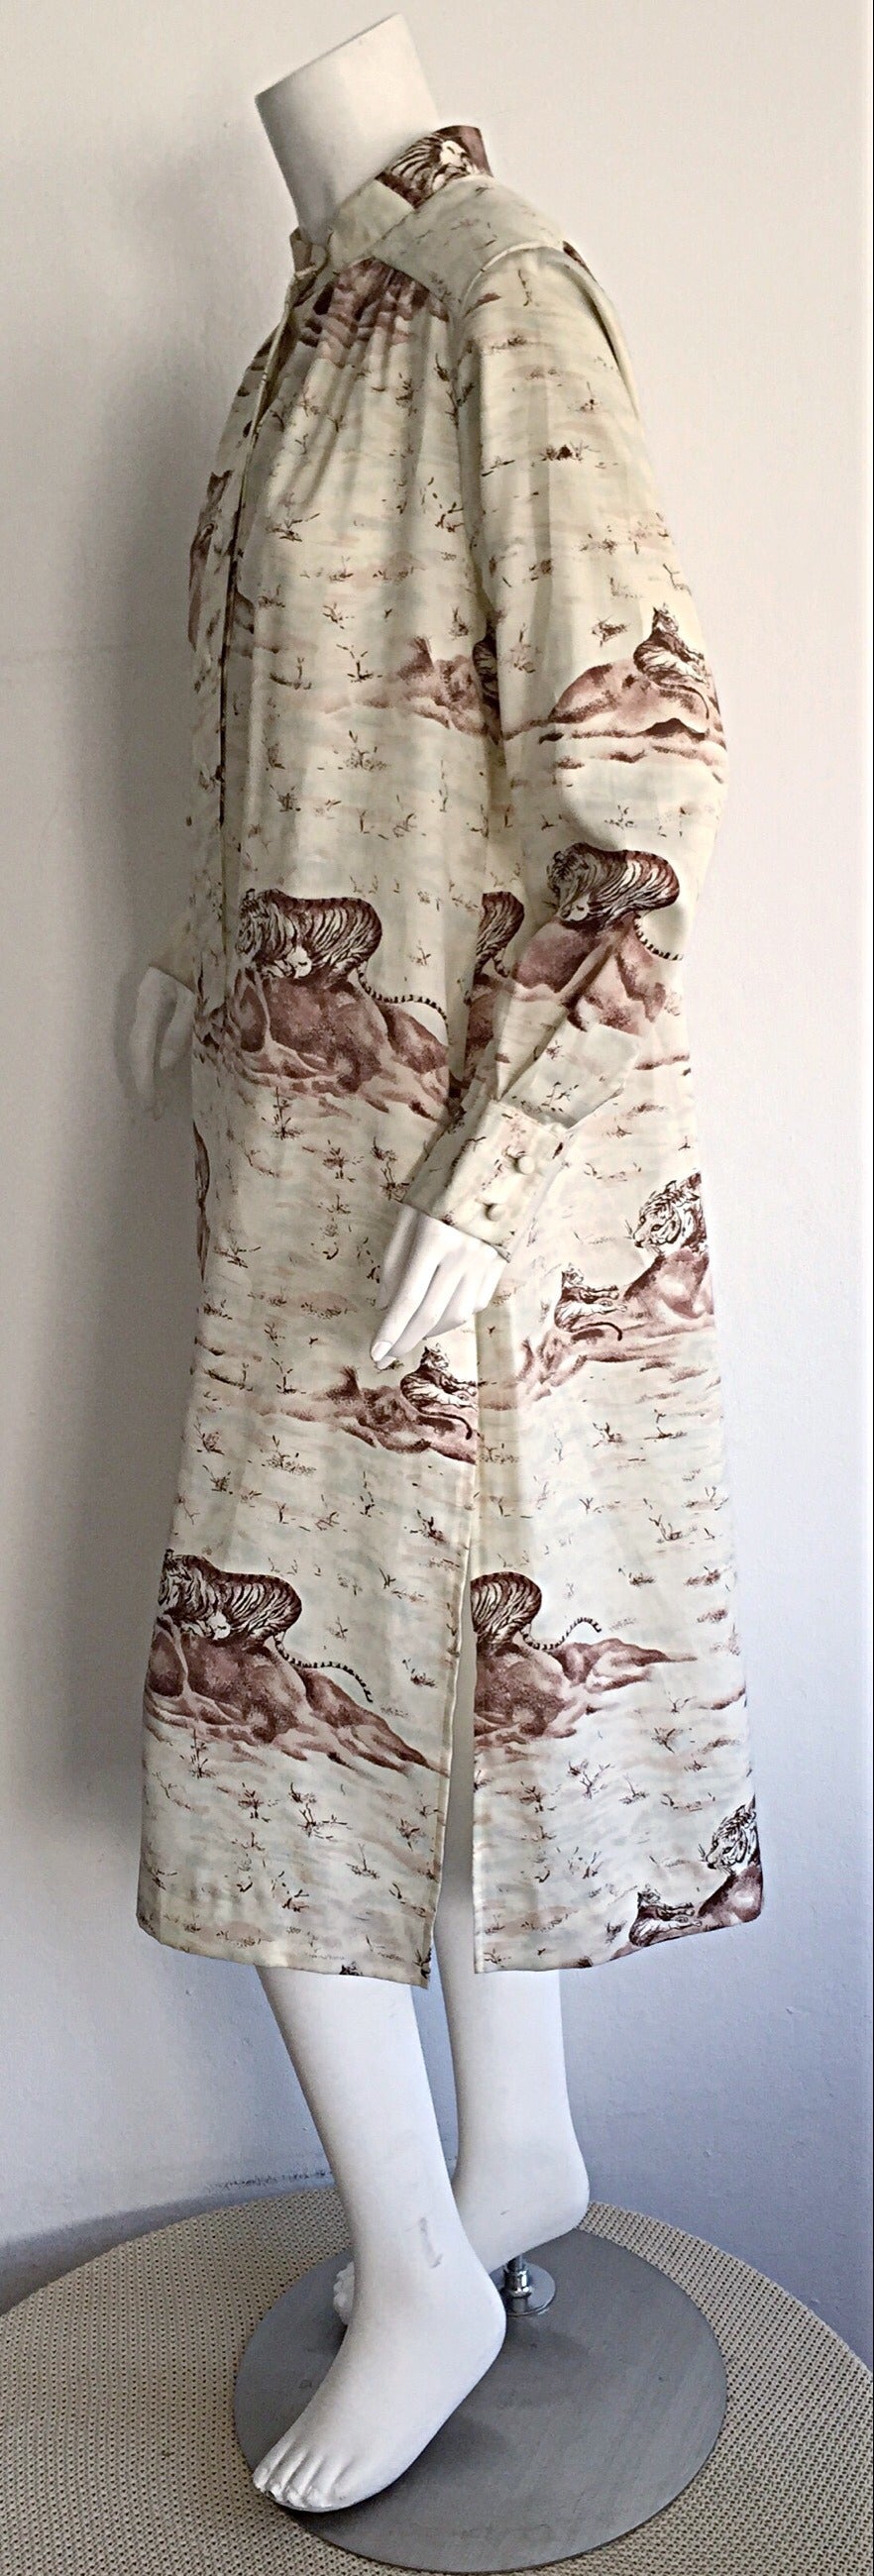 Rare Vintage Jeanne Lanvin Asian / Chinese Themed Tiger Print Tunic Dress 2